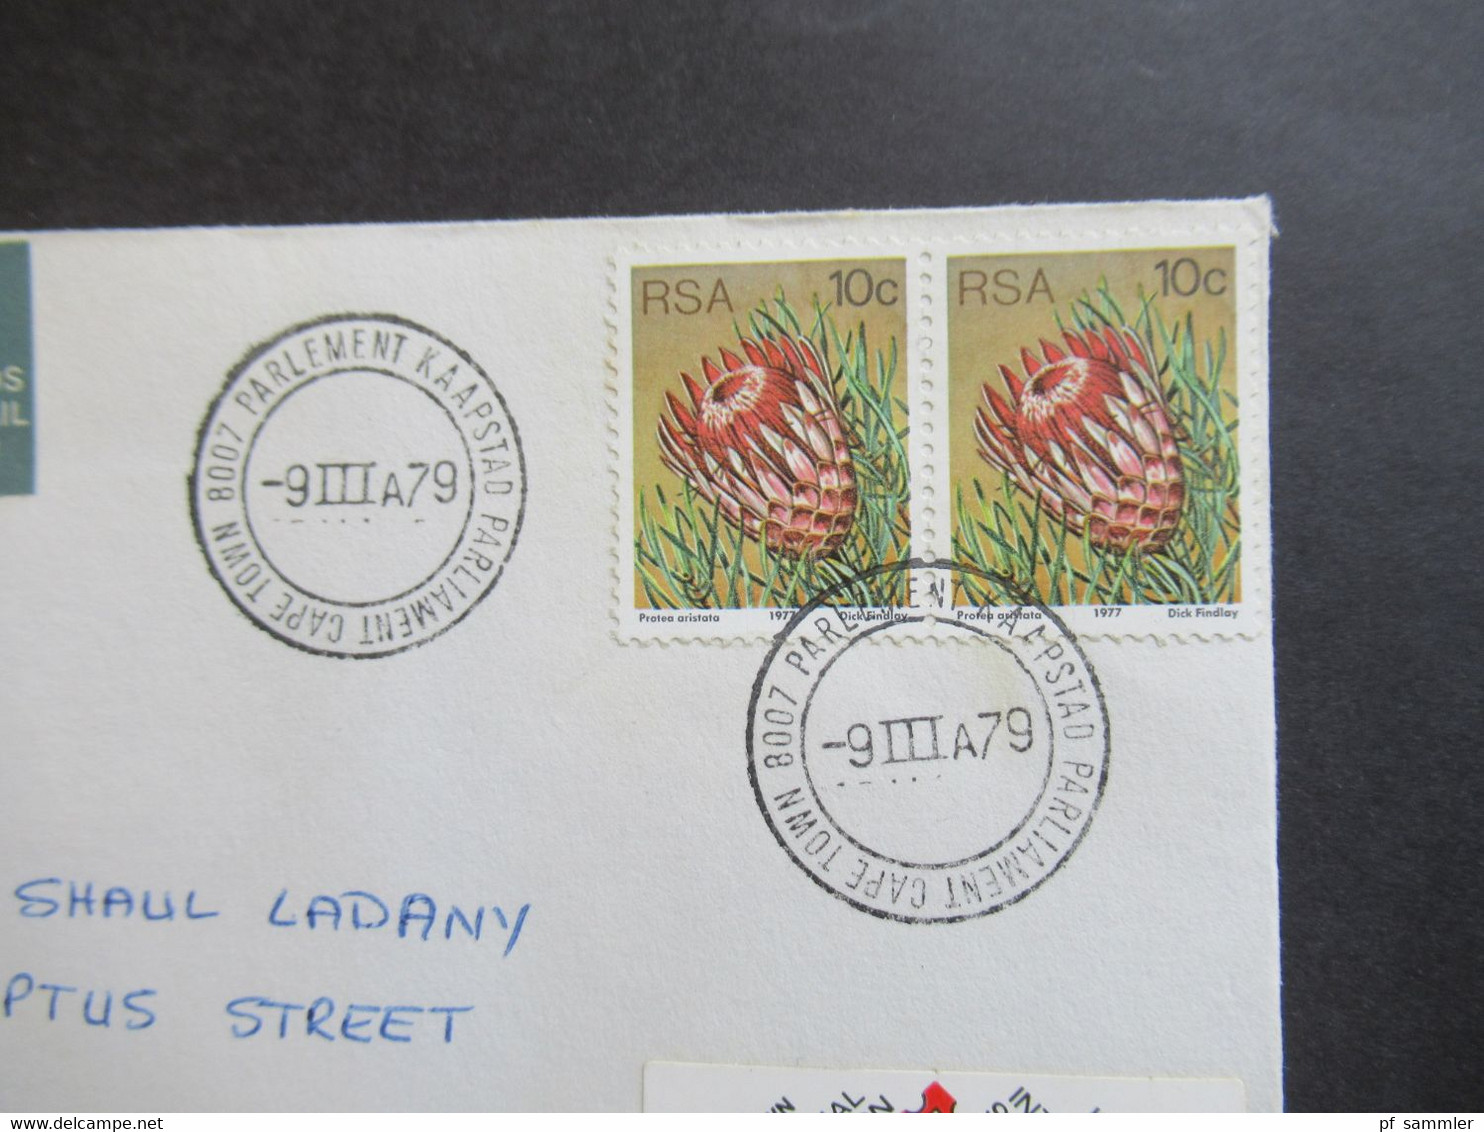 Afrika / Süd - Afrika 1979 Stempel Parliament Cape Town Per Lugpos / Air Mail Nach Omer Israel Aufkleber DISA 1979 - Covers & Documents